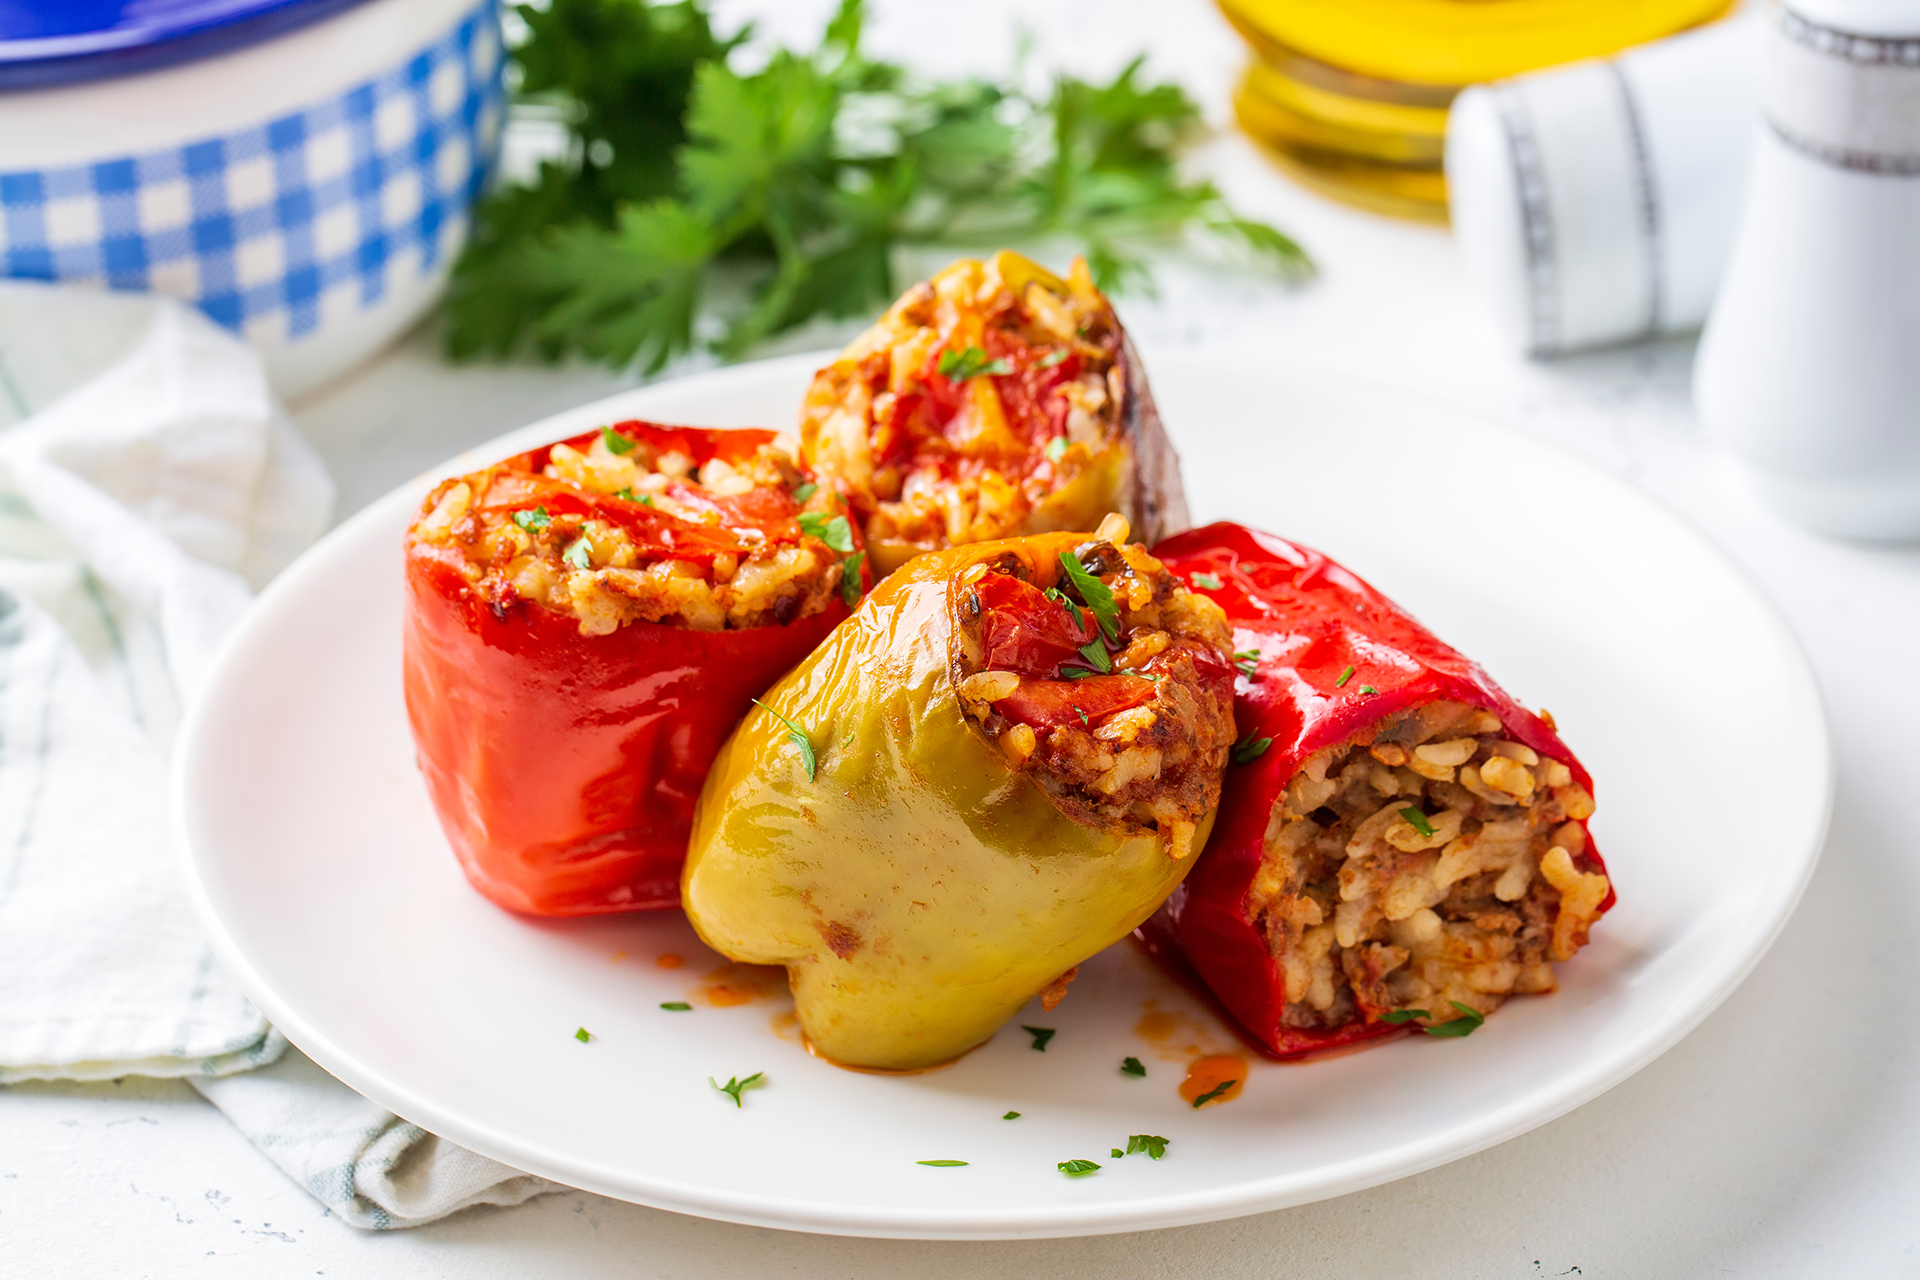 Colorful bell peppers or tomatoes stuffed with a flavorful rice and meat mixture